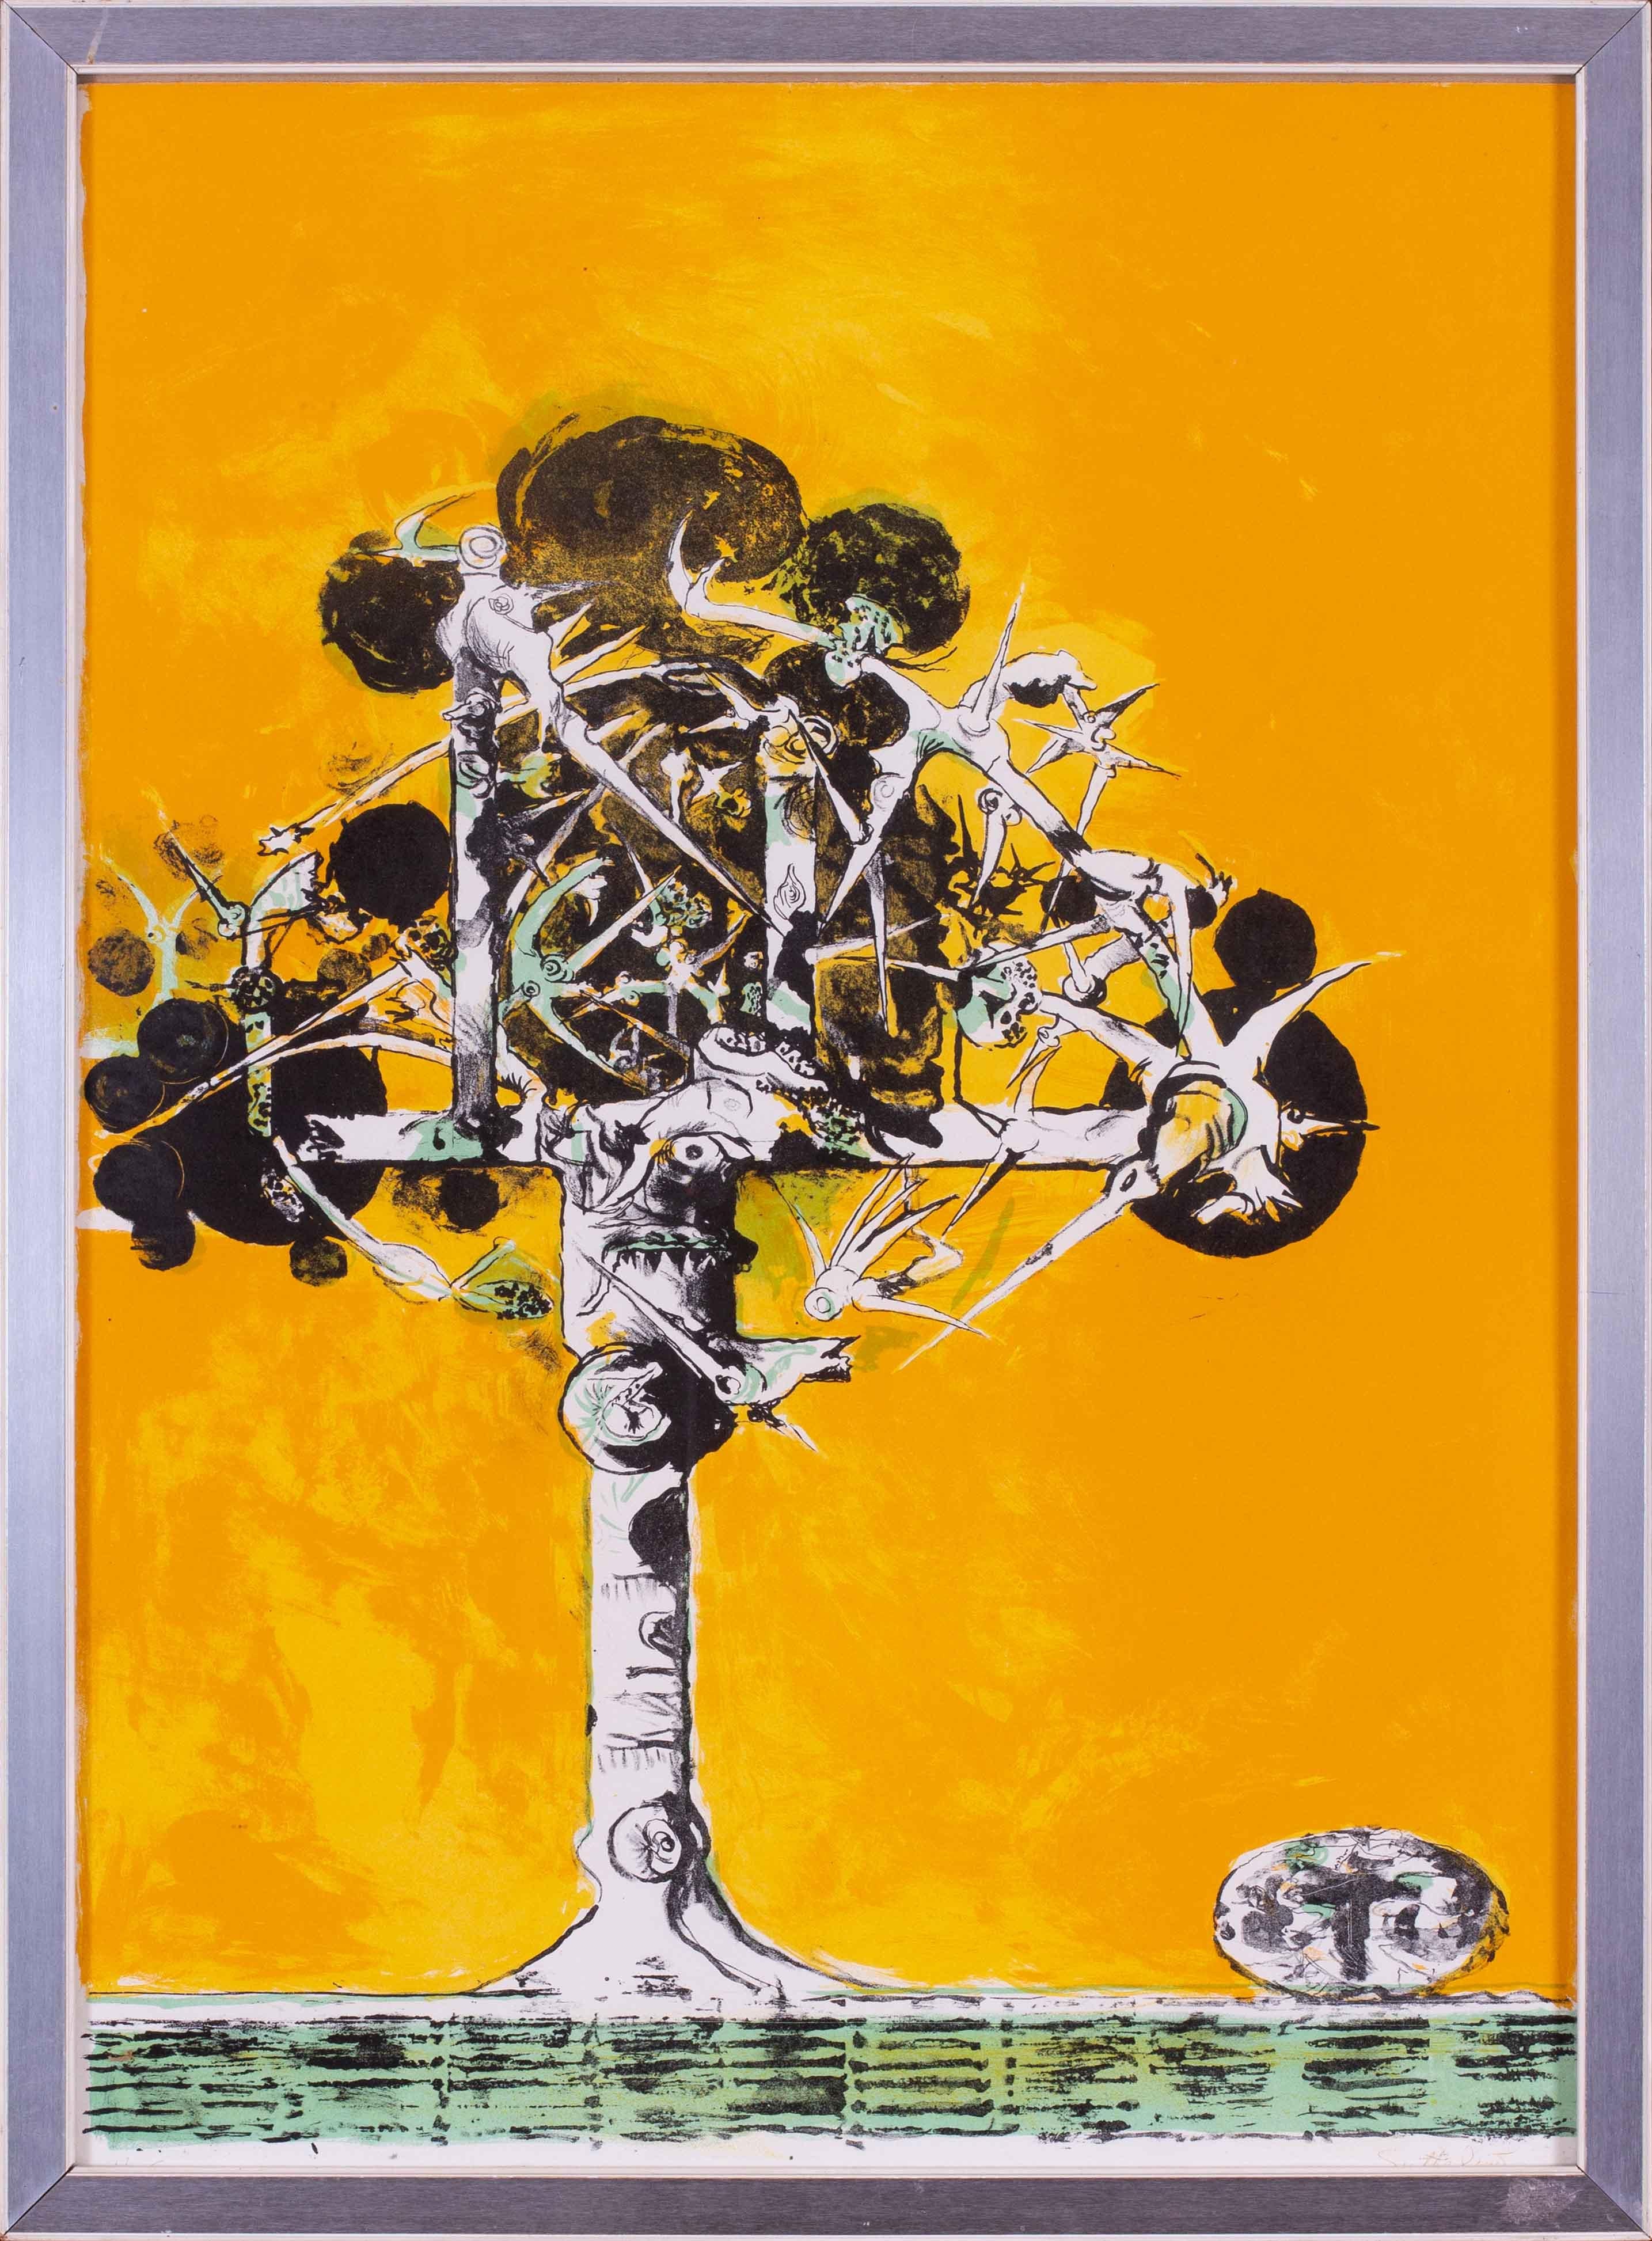 An original signed Graham Sutherland lithograph 'Thorn Structure'.  A contorted thorn structure against a strong yellow background.

Graham Sutherland was a painter of imaginative landscapes, still life, figure pieces and portraits.
 
He was born on